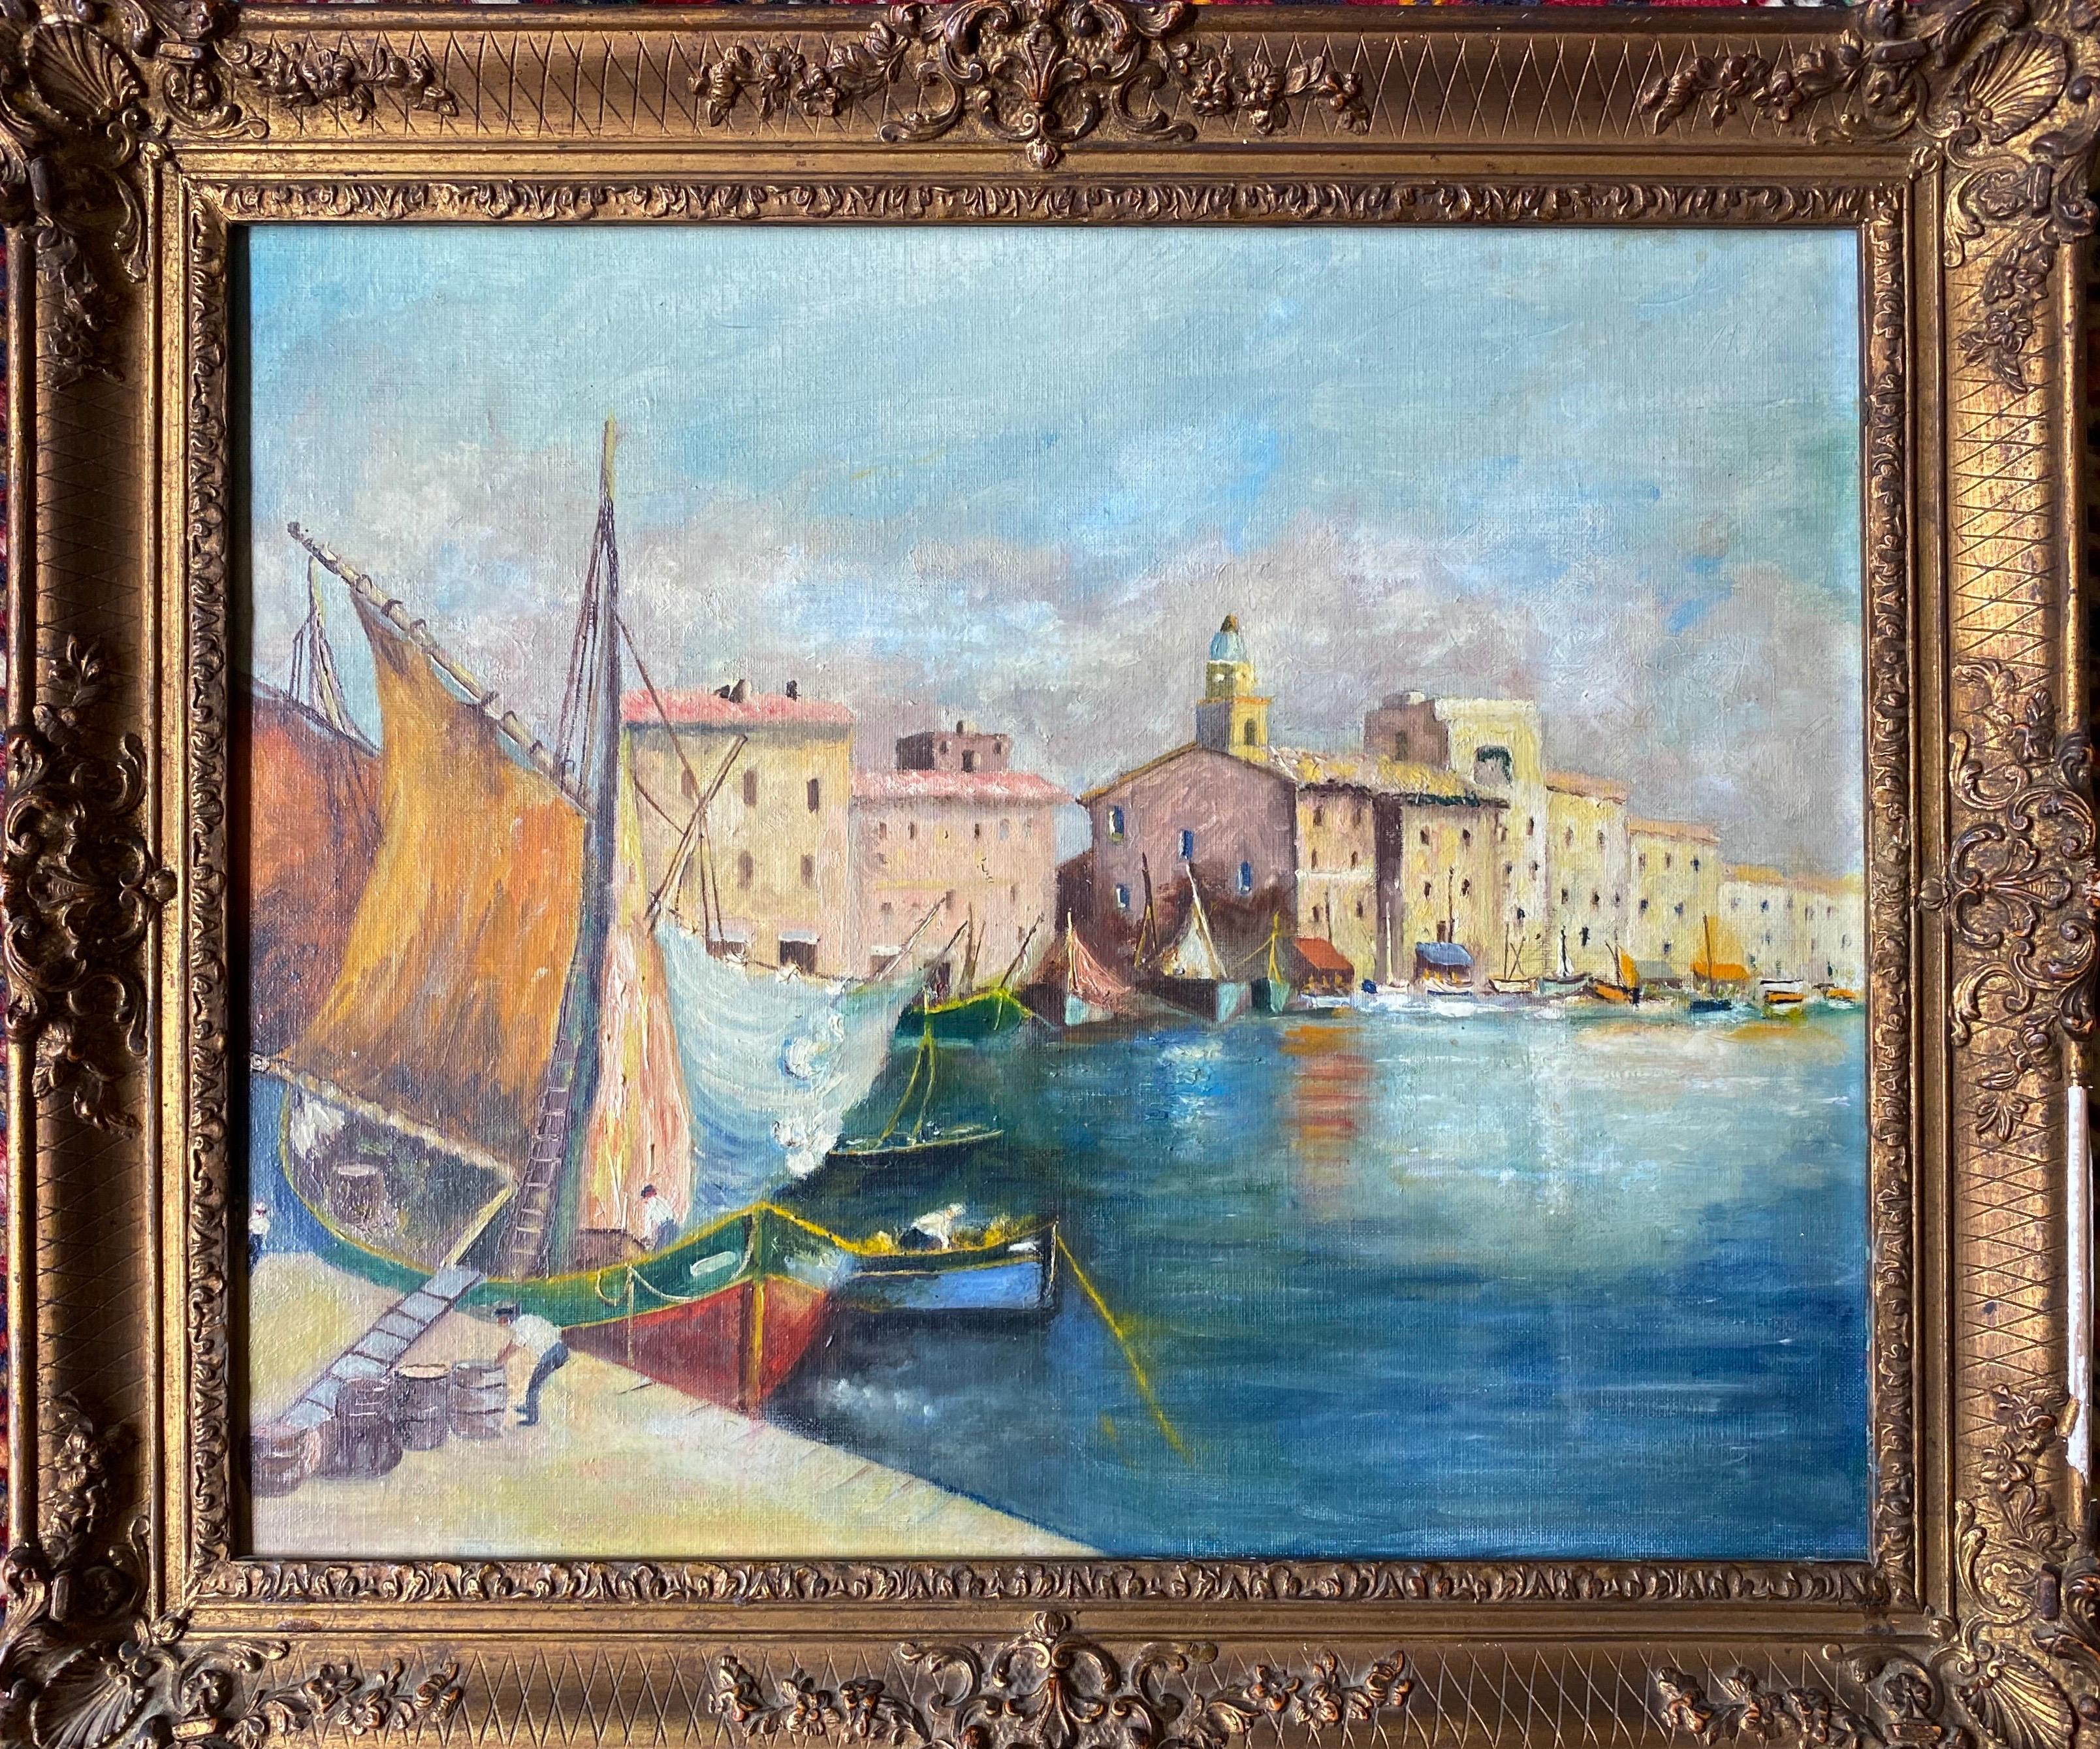 Unknown Landscape Painting - Vintage French Oil Loading the Boats in Mediterranean Sleepy Harbour Town